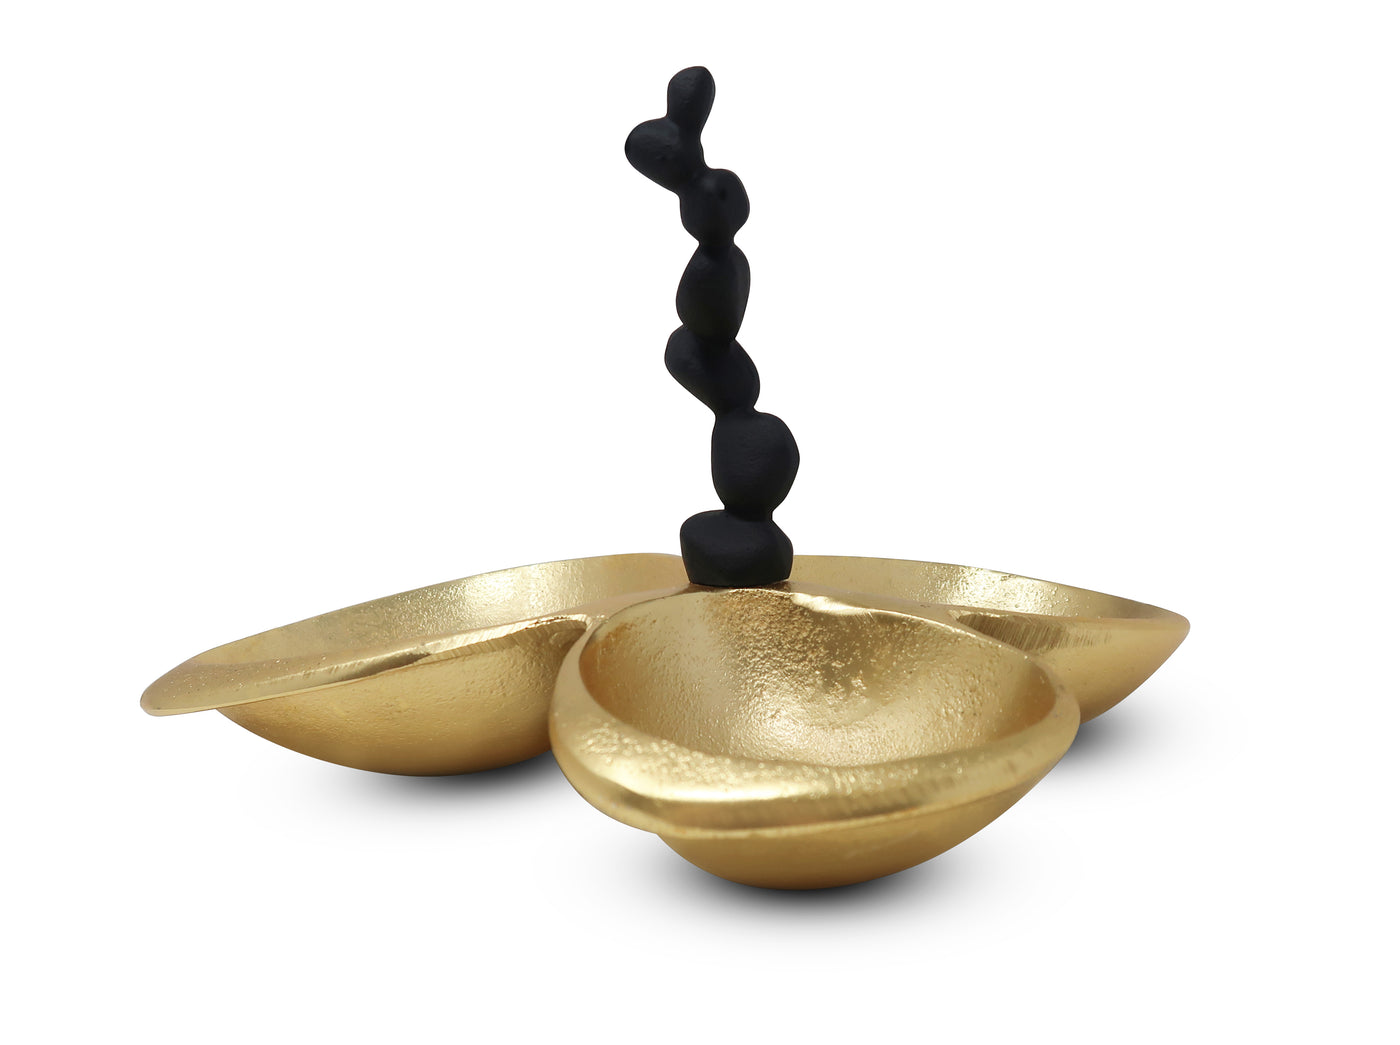 Gold 3 Bowl Relish Dish with Black Handle and Pebble Design